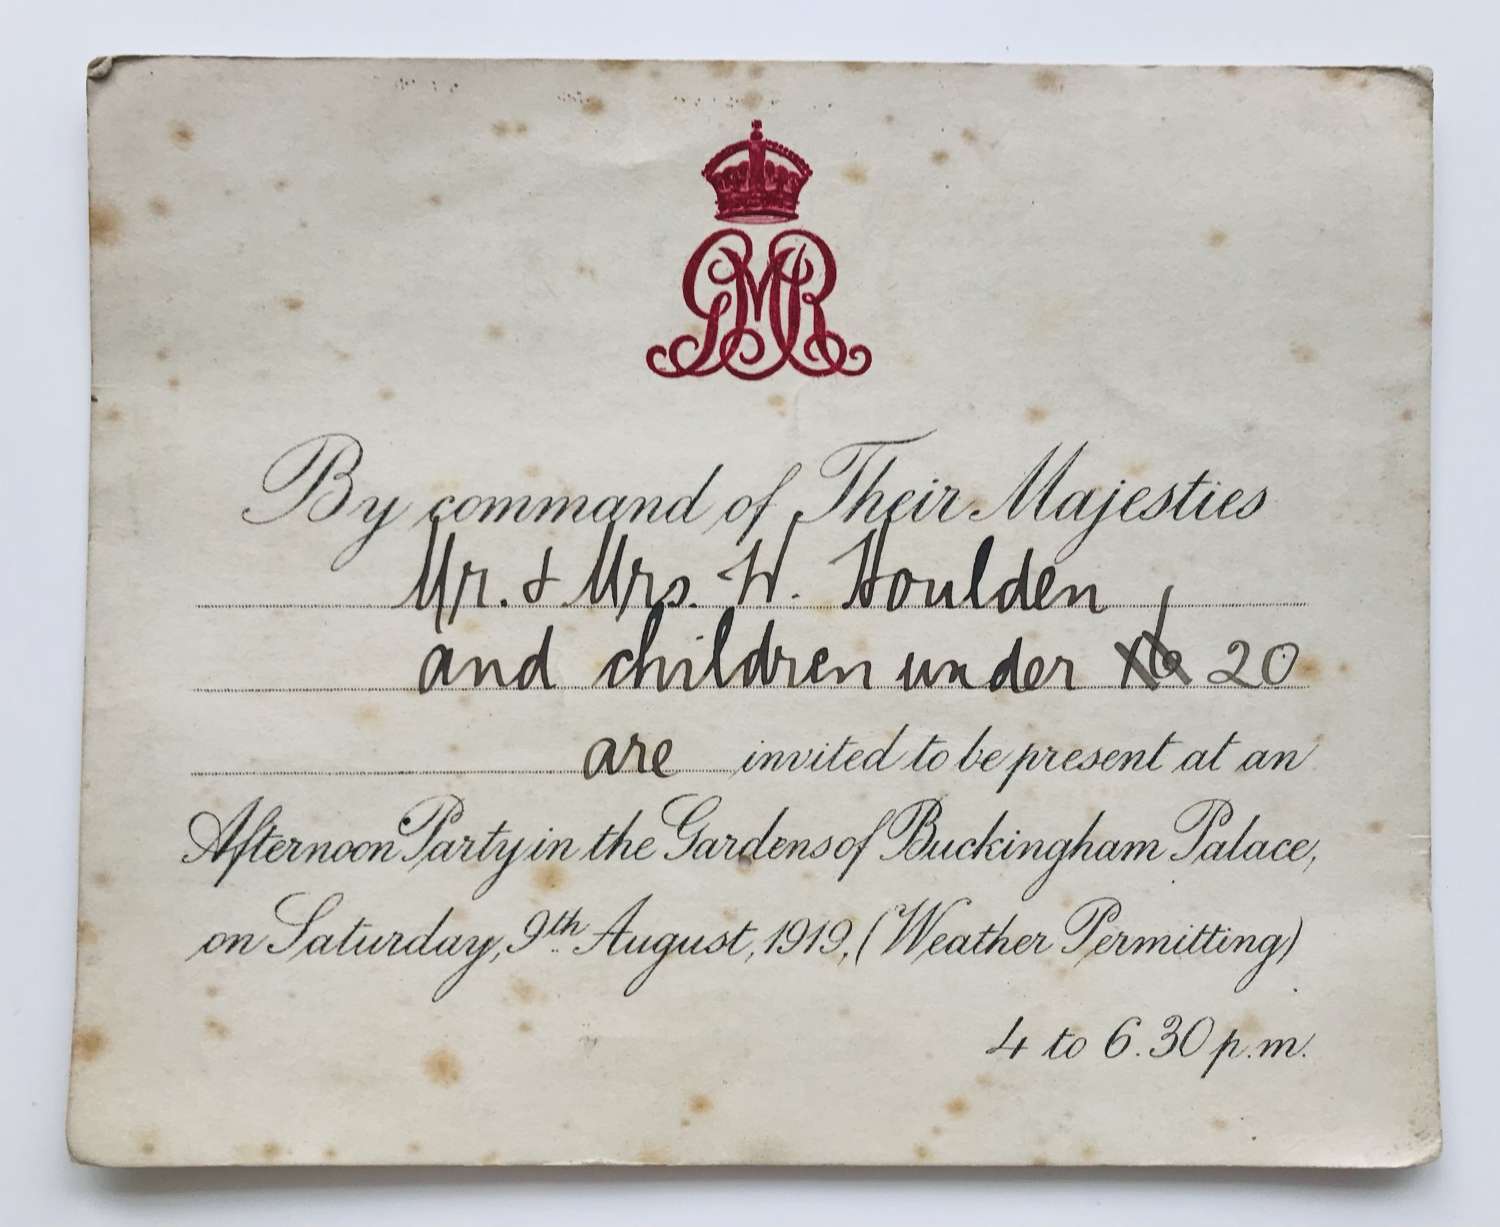 Invitation to Buckingham Palace for a garden party, 1919